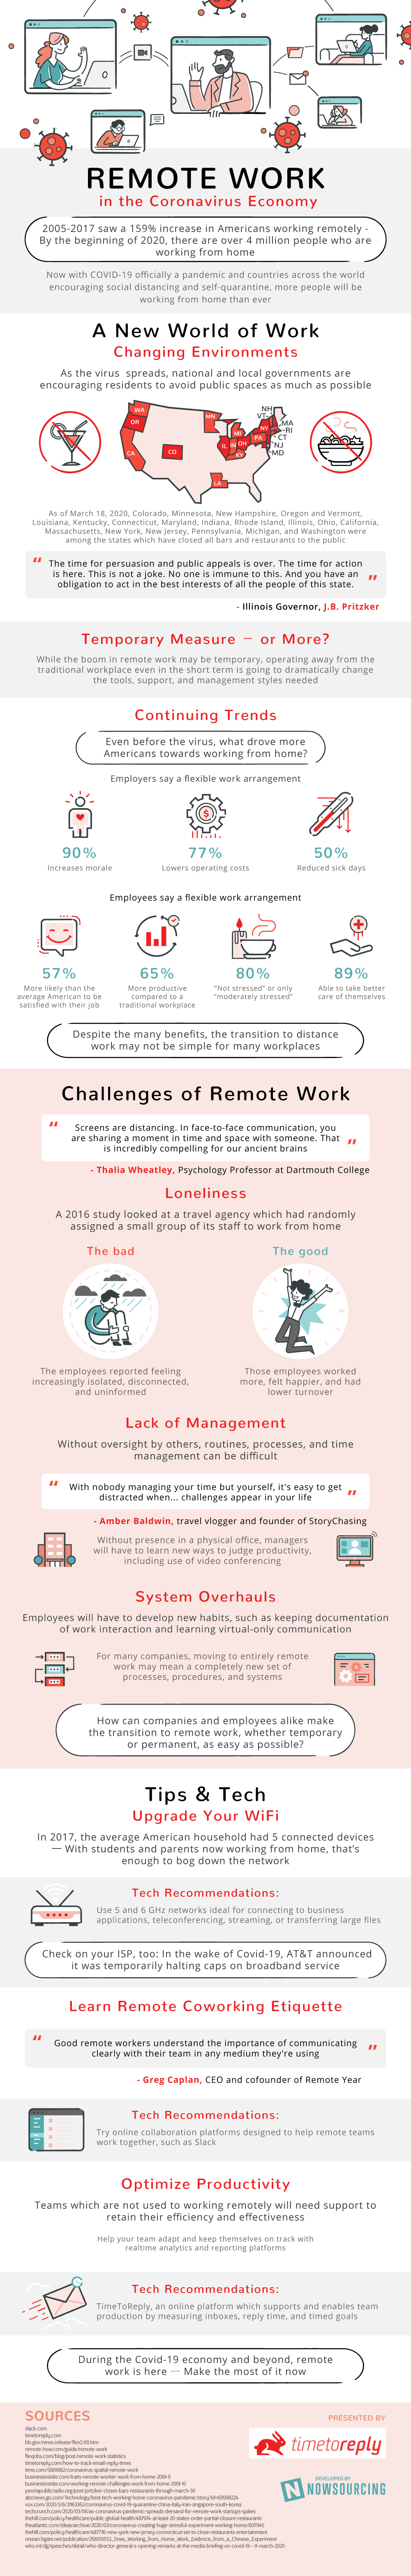 Timetoreply Remote Work Infographic, Industry Today